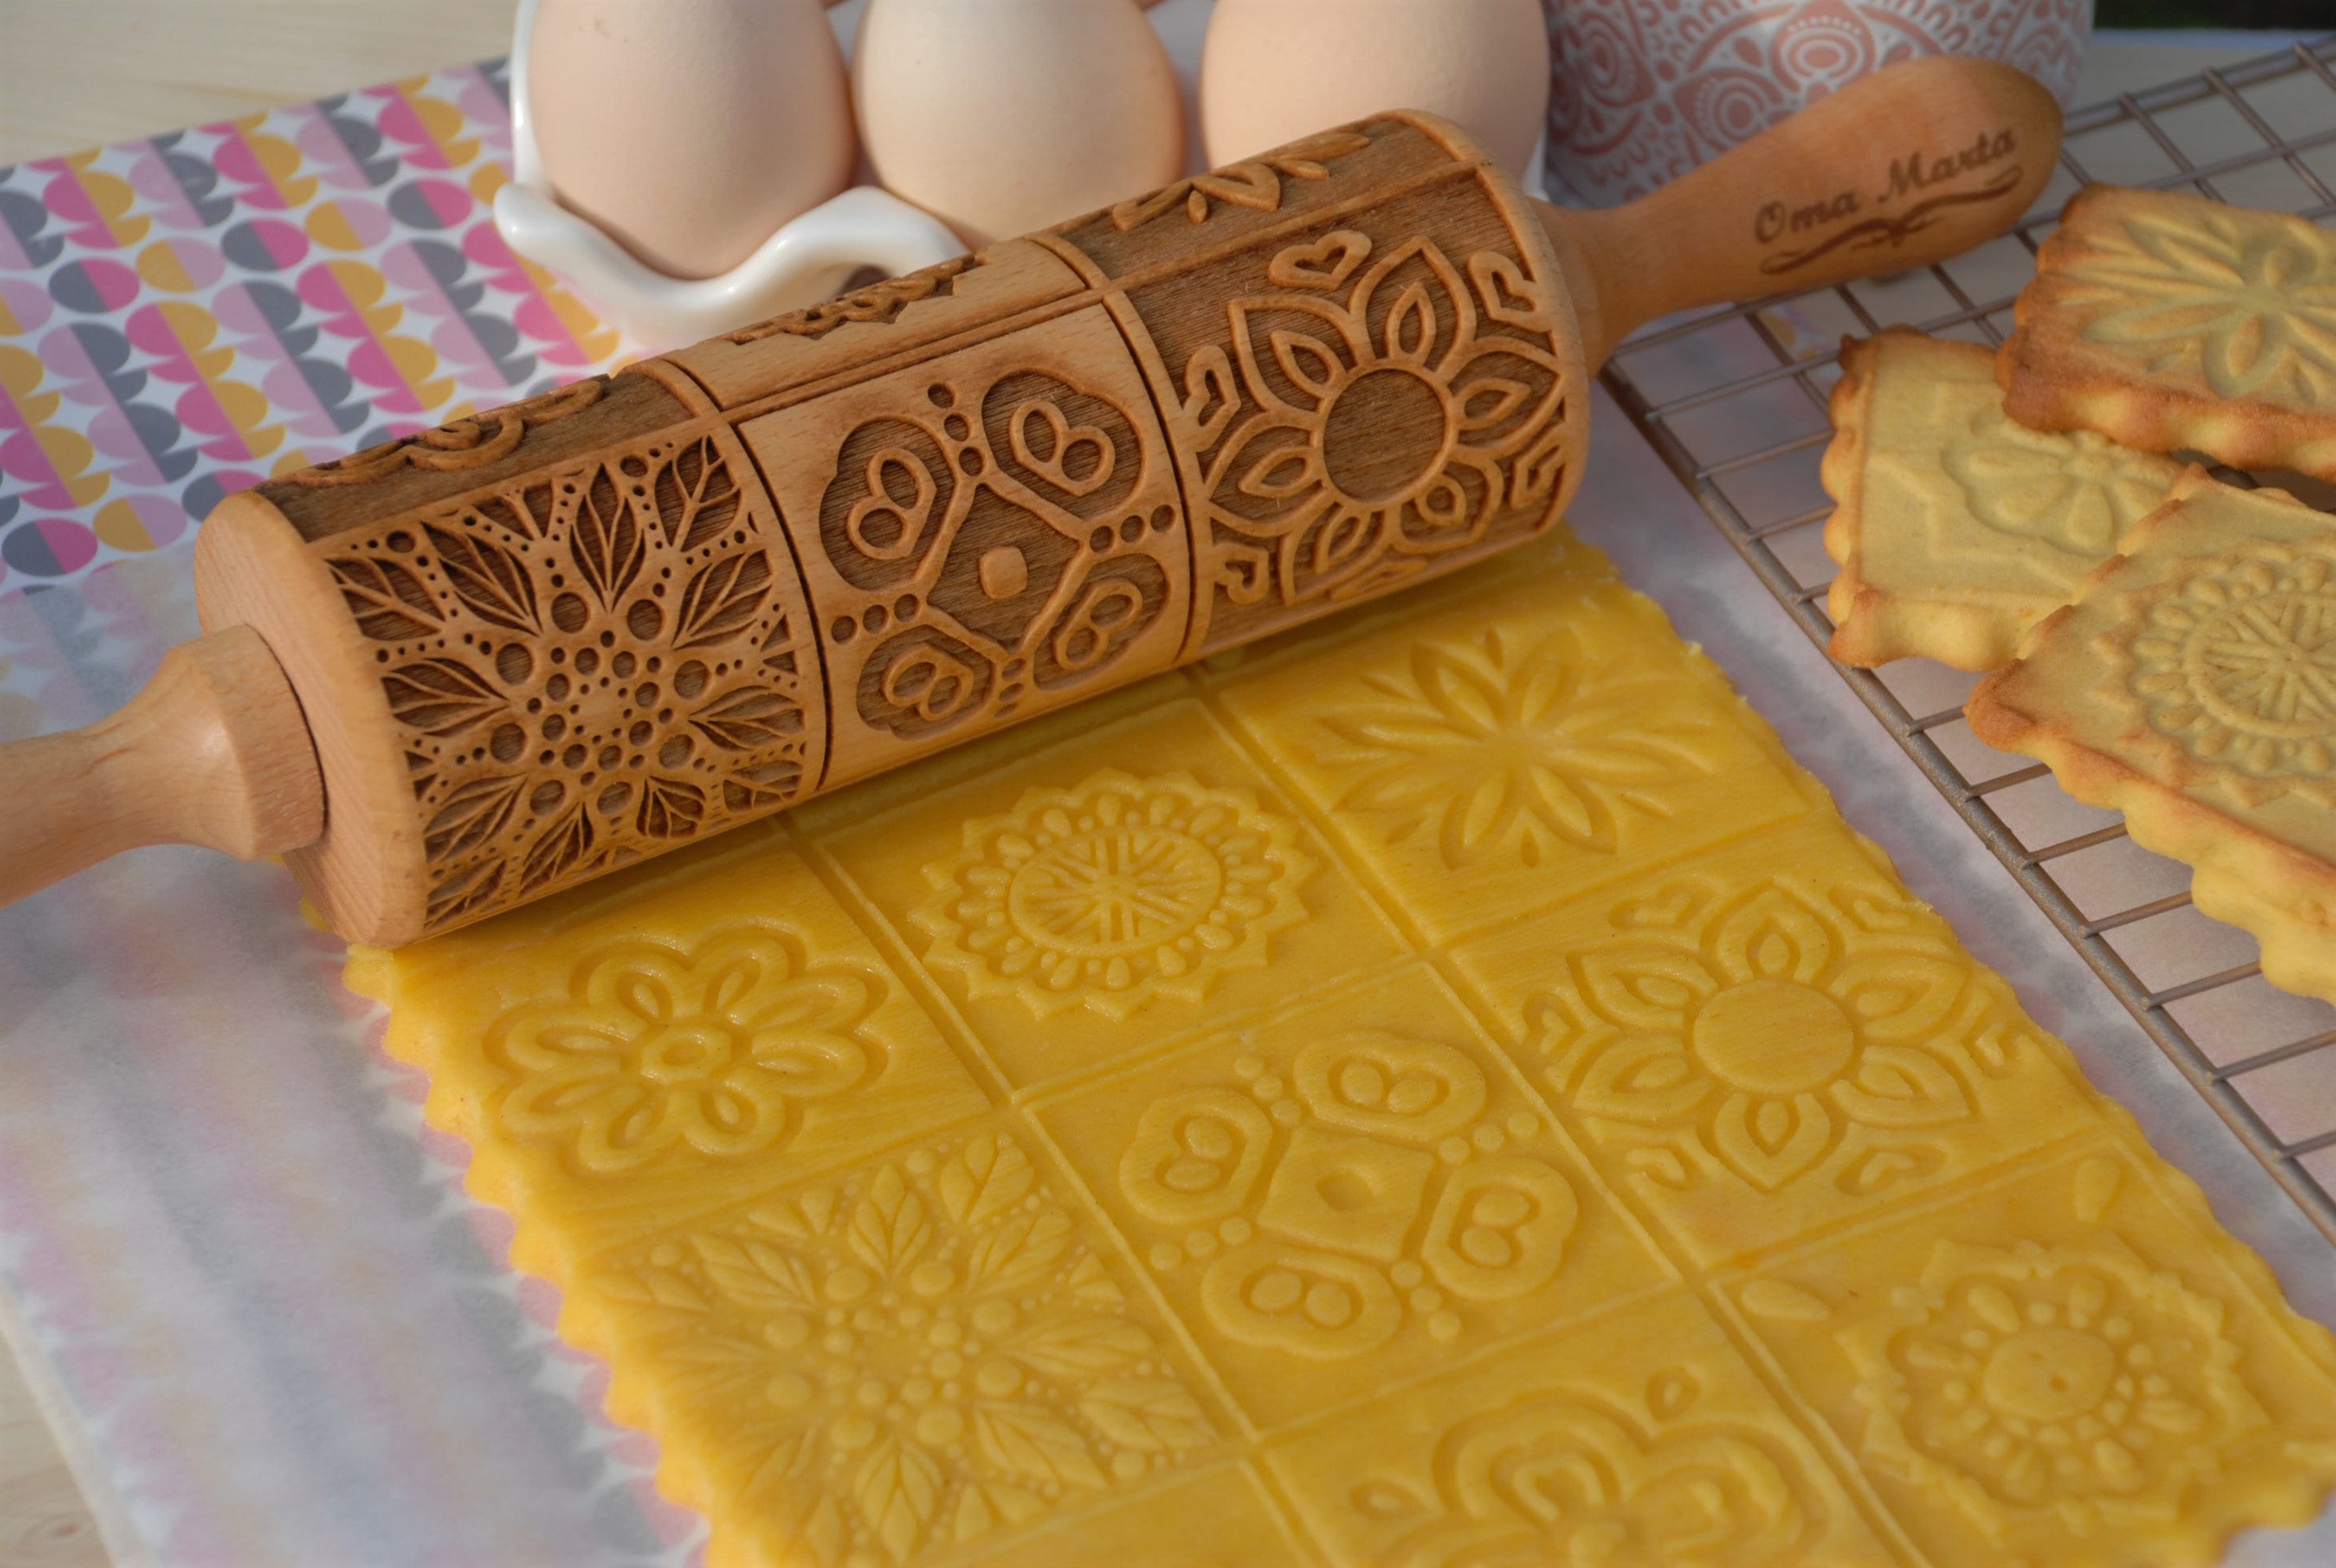 Buy Folk Embossed Rolling Pin Textured Cookies Springerle Rolling Pin Gift  for Her Cookie Stamp Baking Mold Fondant Patterned Roller Gingerbread  Online in India 